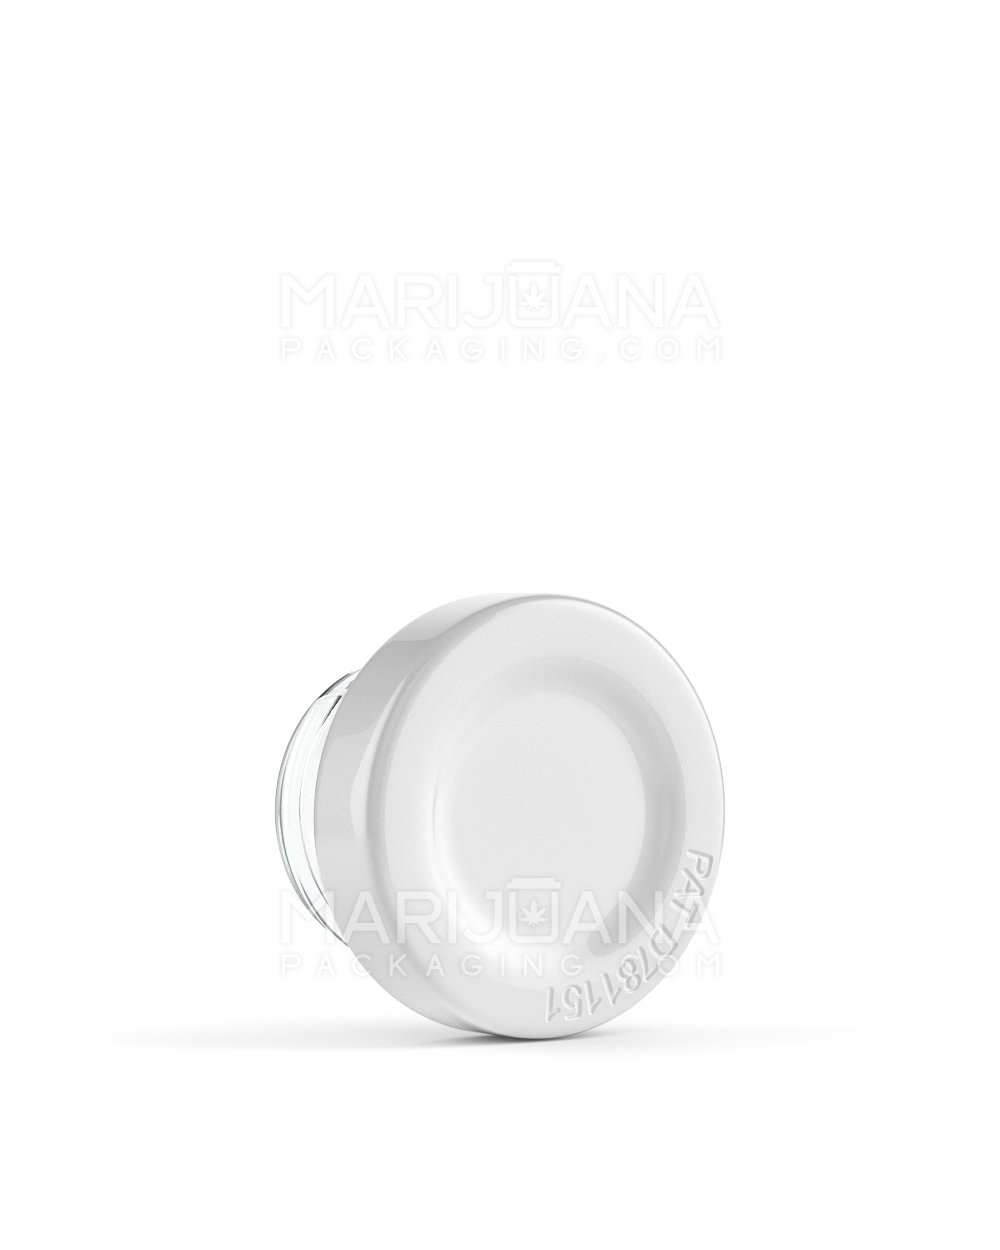 White Glass Concentrate Containers | 28mm - 5mL - 504 Count - 4